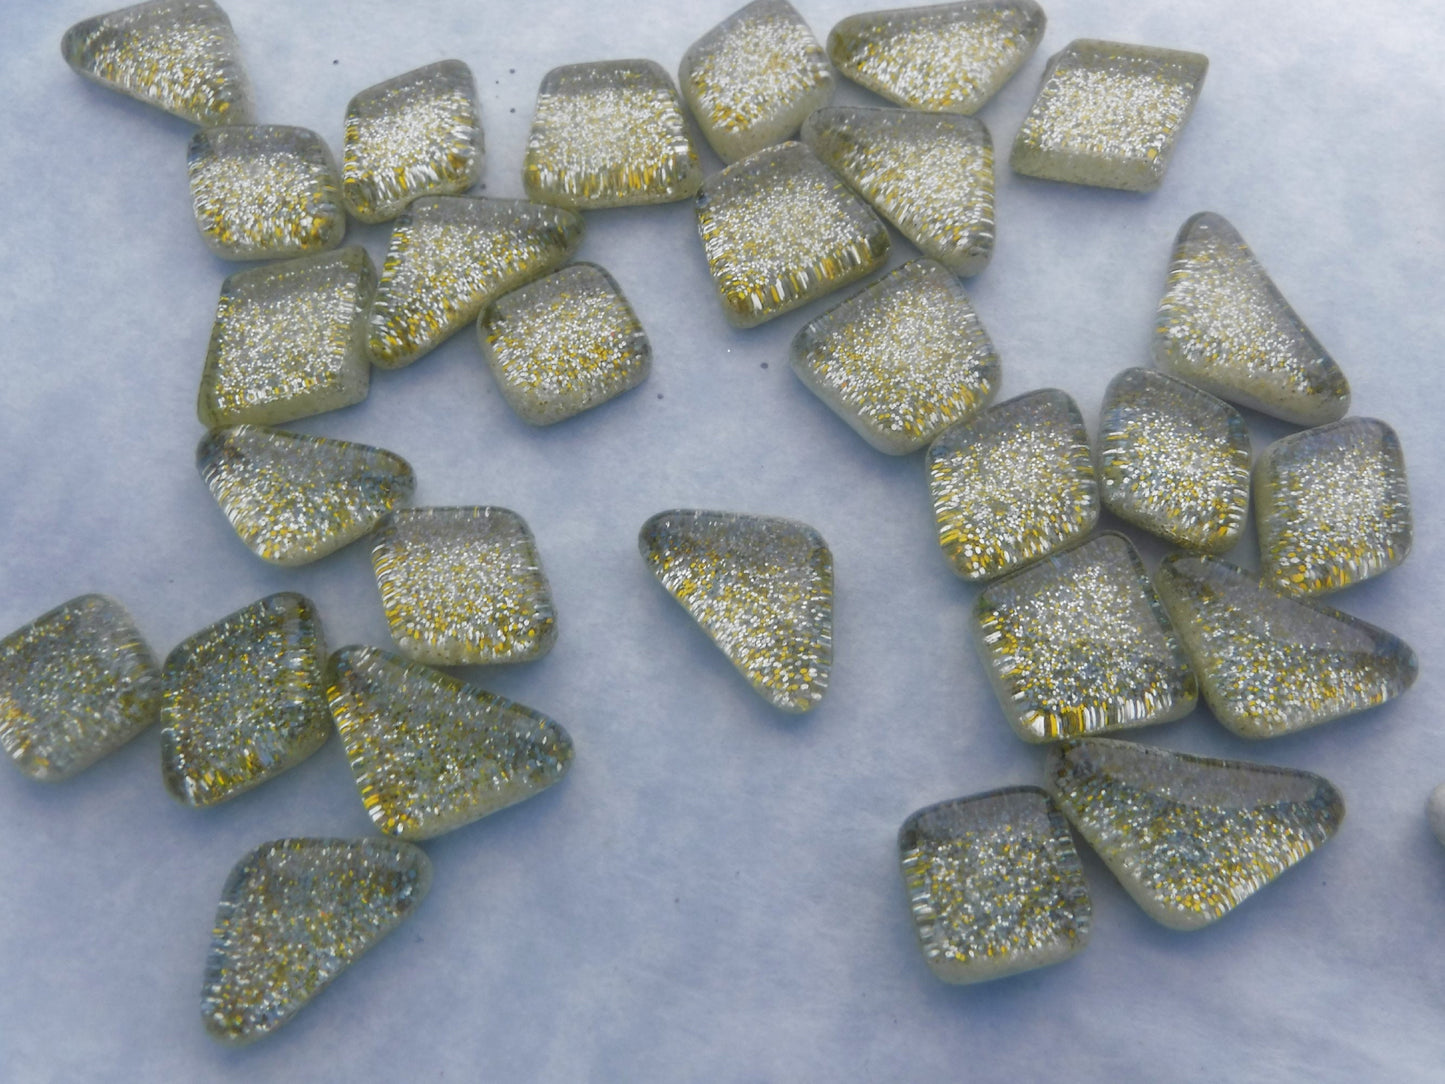 Gold and Silver Glitter Puzzle Tiles - 100 grams in Assorted Shapes Glass Mosaic Tiles - Cafe Au Lait